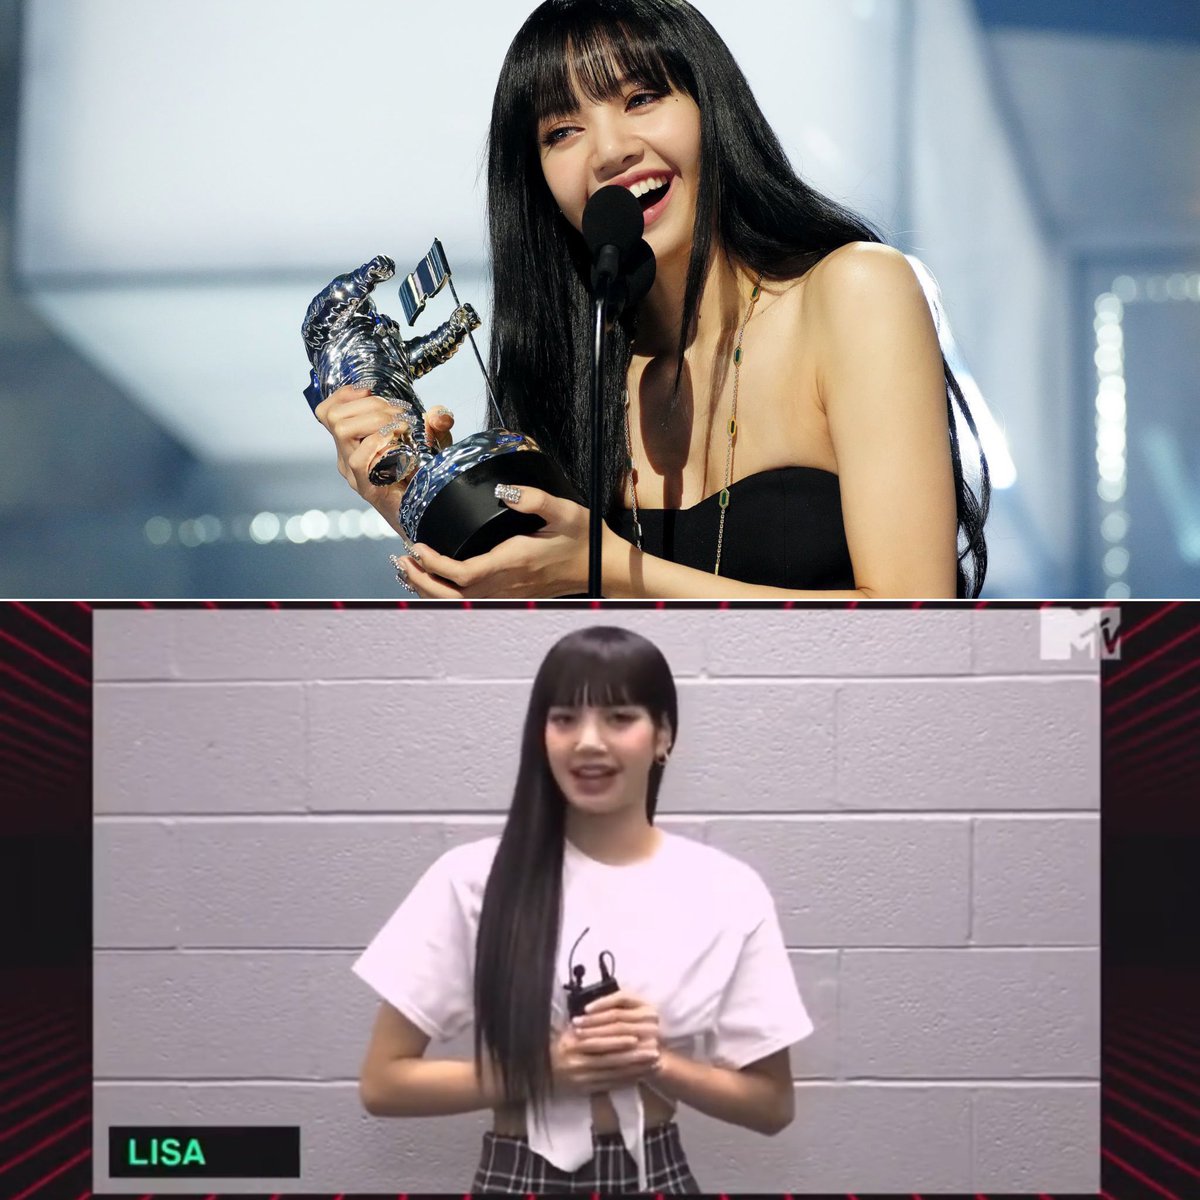 #BLACKPINK’s #LISA has won ‘Best K-Pop’ at both this year’s #VMAs and #MTVEMA. She becomes the first solo artist in HISTORY to win both awards.